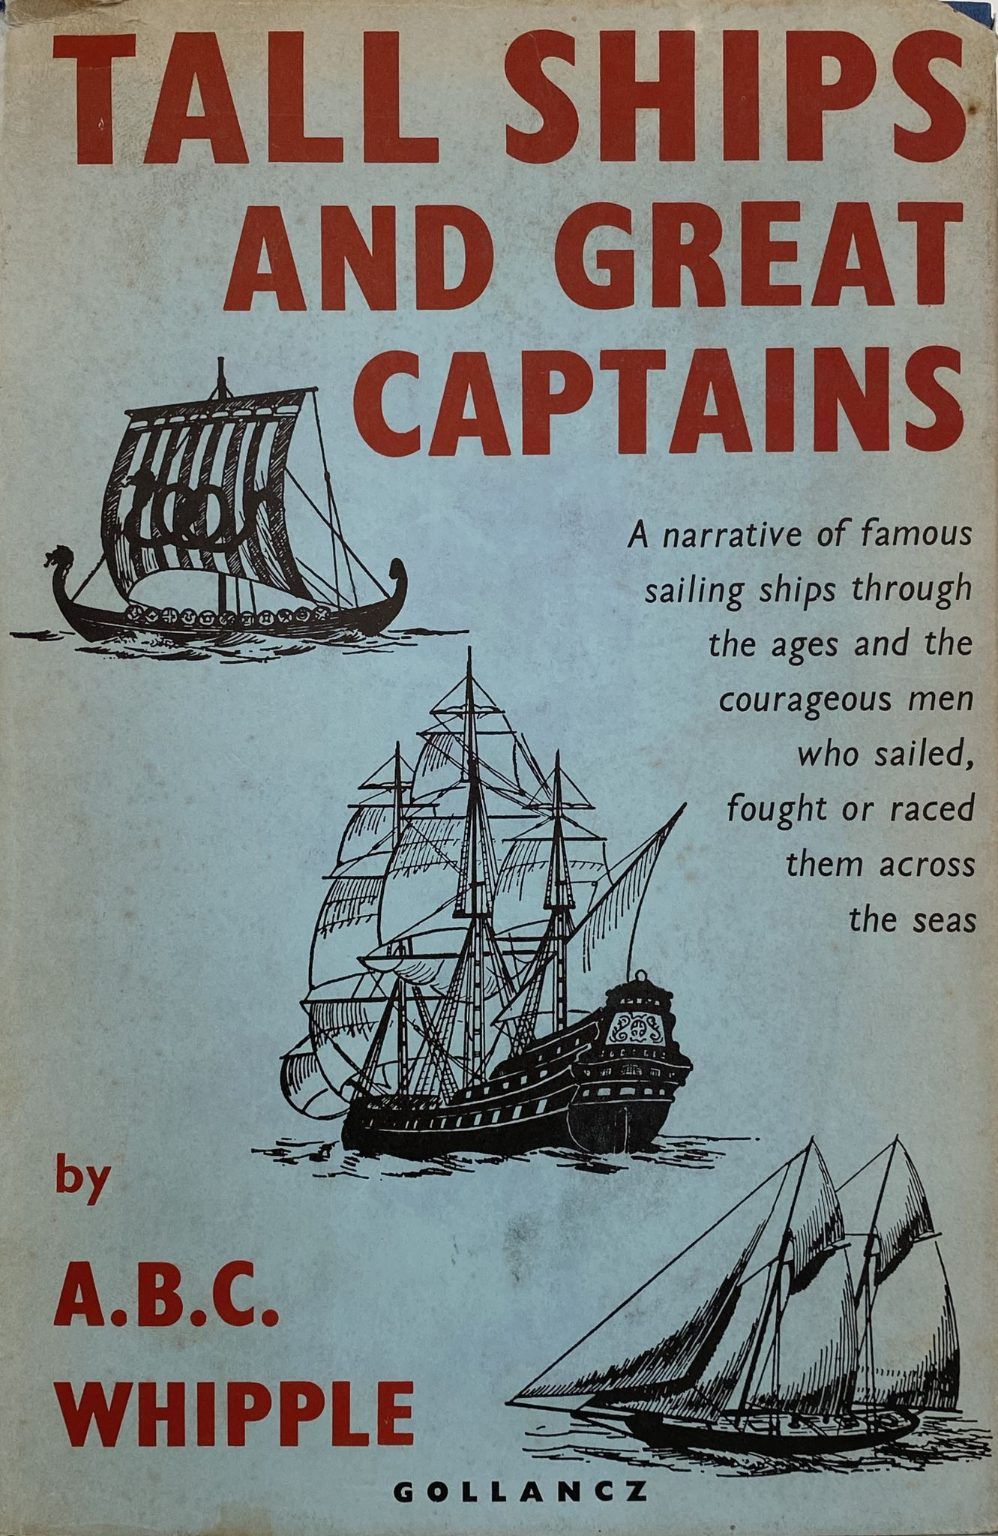 TALL SHIPS AND GREAT CAPTAINS: A Narrative of Famous Sailing Ships